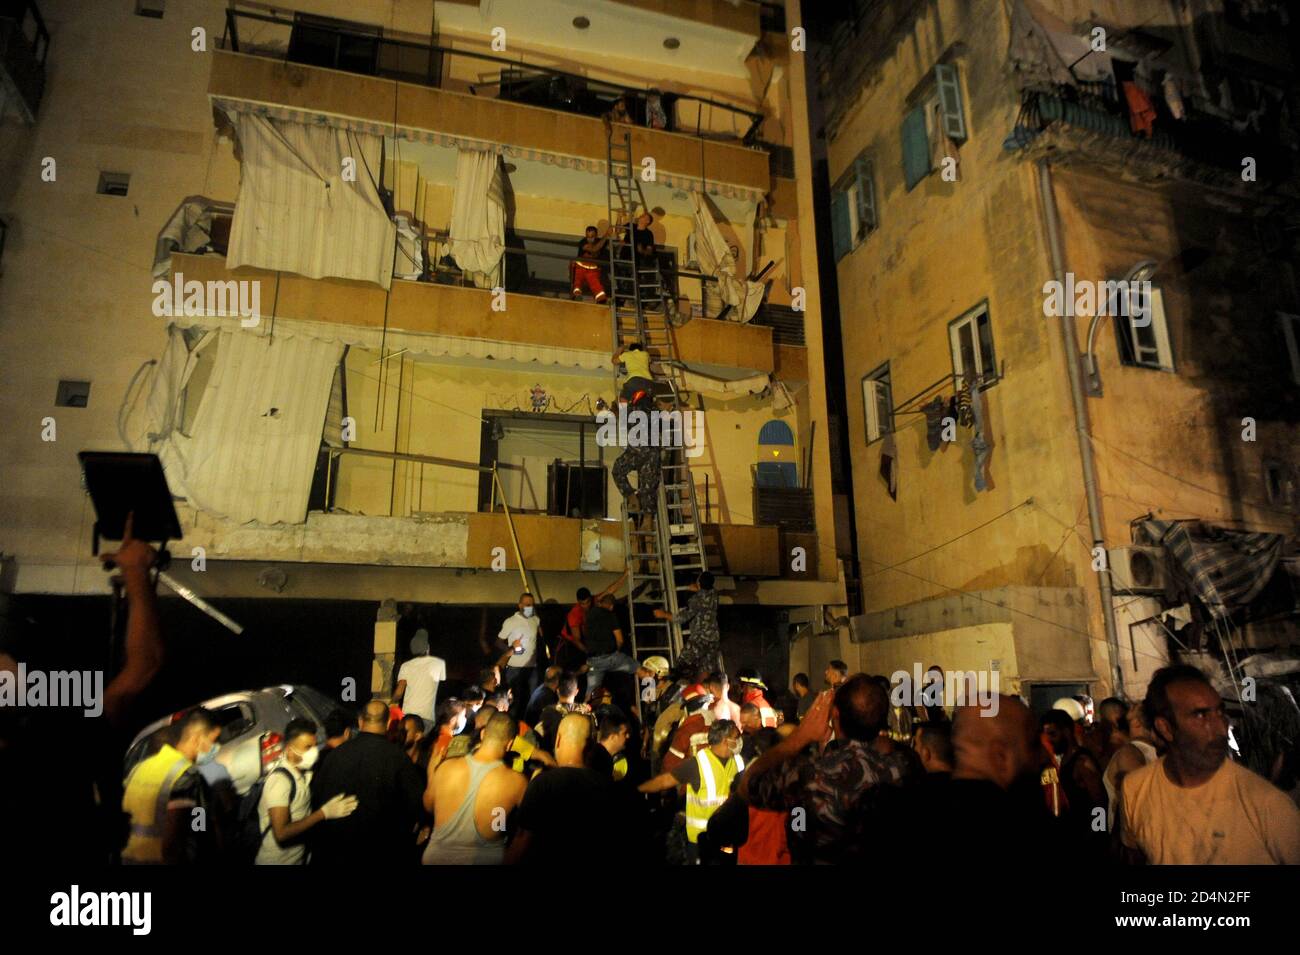 Beijing, Lebanon. 9th Oct, 2020. Civil defense members help people evacuate from a building after a warehouse explosion in Tariq El Jdide neighborhood in Beirut, Lebanon, Oct. 9, 2020. Two people were dead and more than 20 others injured in an explosion at a warehouse in Lebanon's capital Beirut on Friday night, al-Jadeed TV channel reported. Credit: Bilal Jawich/Xinhua/Alamy Live News Stock Photo